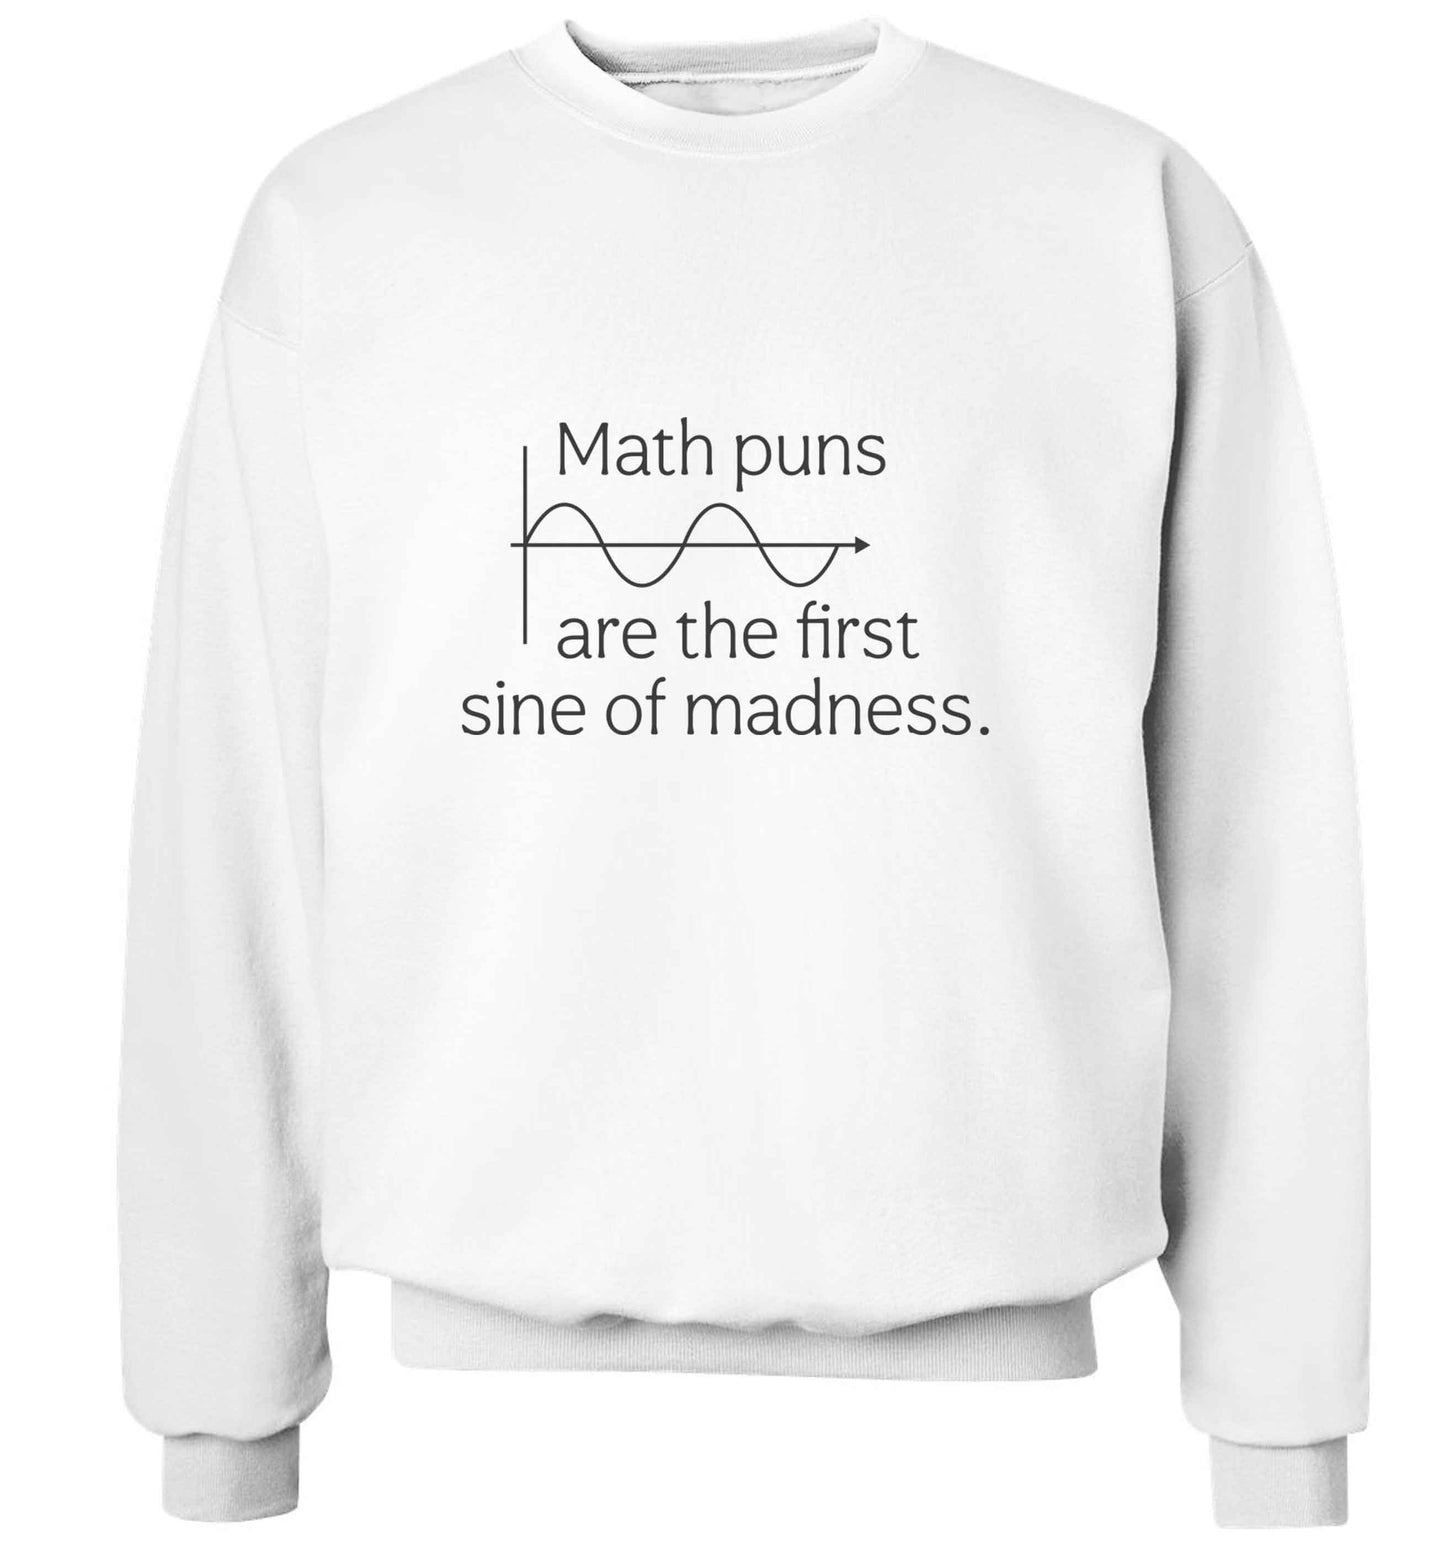 Math puns are the first sine of madness adult's unisex white sweater 2XL